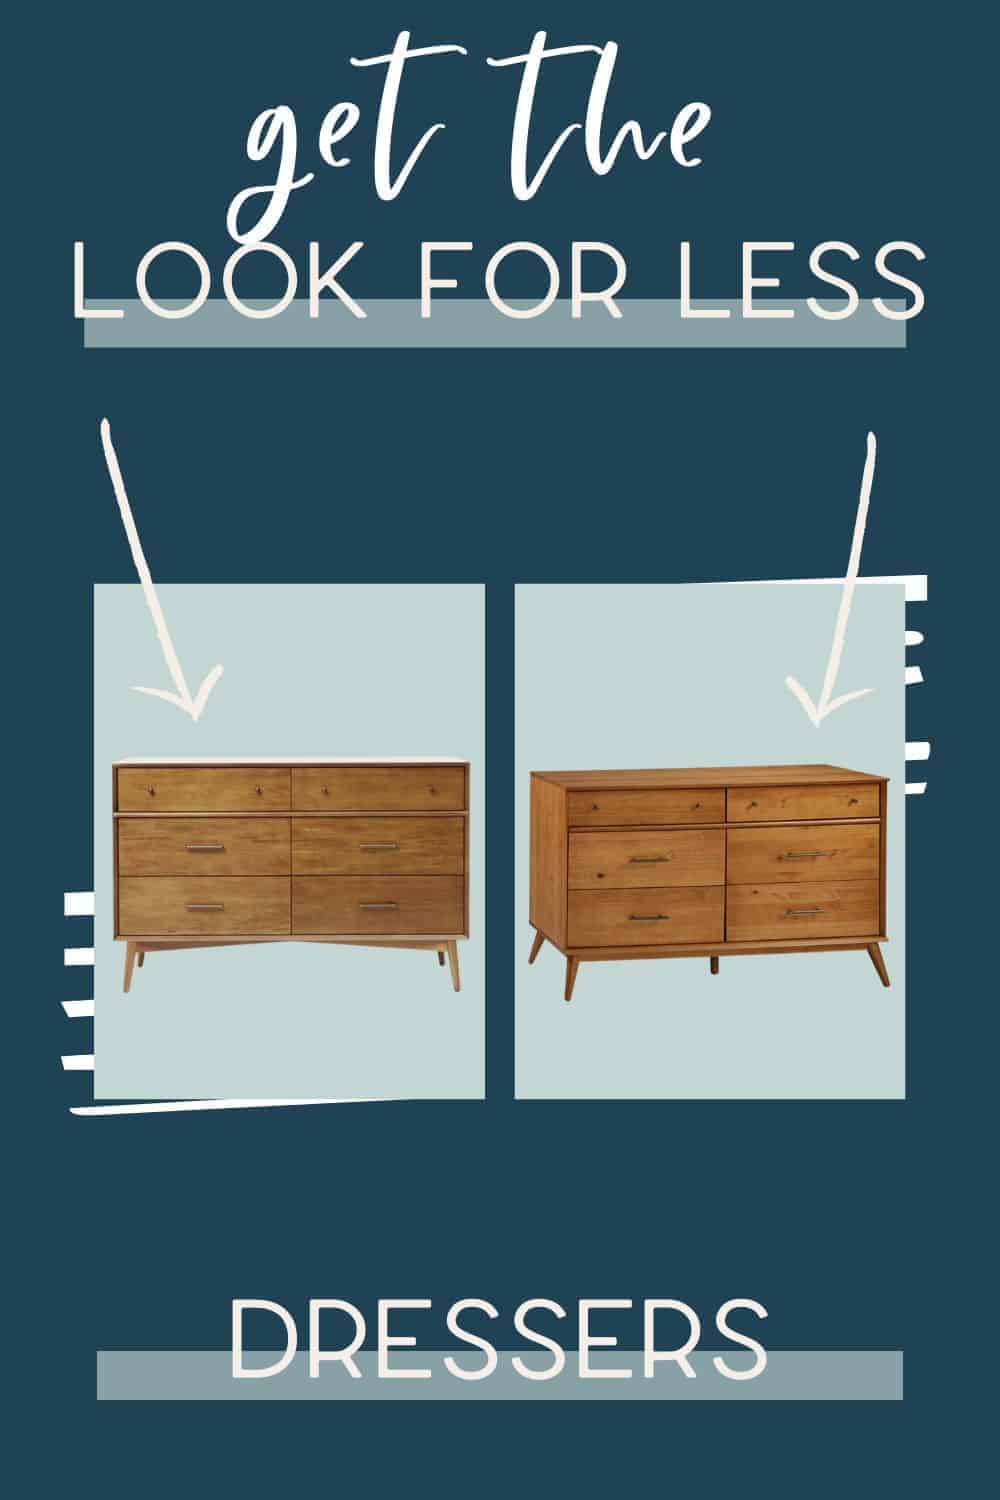 It's time for another edition of get the look for less and today I'm sharing look for less console dressers! You can have a beautiful stylish home without breaking the bank!  Find a beautiful bedroom dresser at a budget friendly price.  These dressers would be perfect in your master bedroom or guest bedroom.  You don’t have to break the bank to have a beautiful home.  If you’re looking for bedroom ideas, this is for you!  #dressers #bedroom #masterbedroom